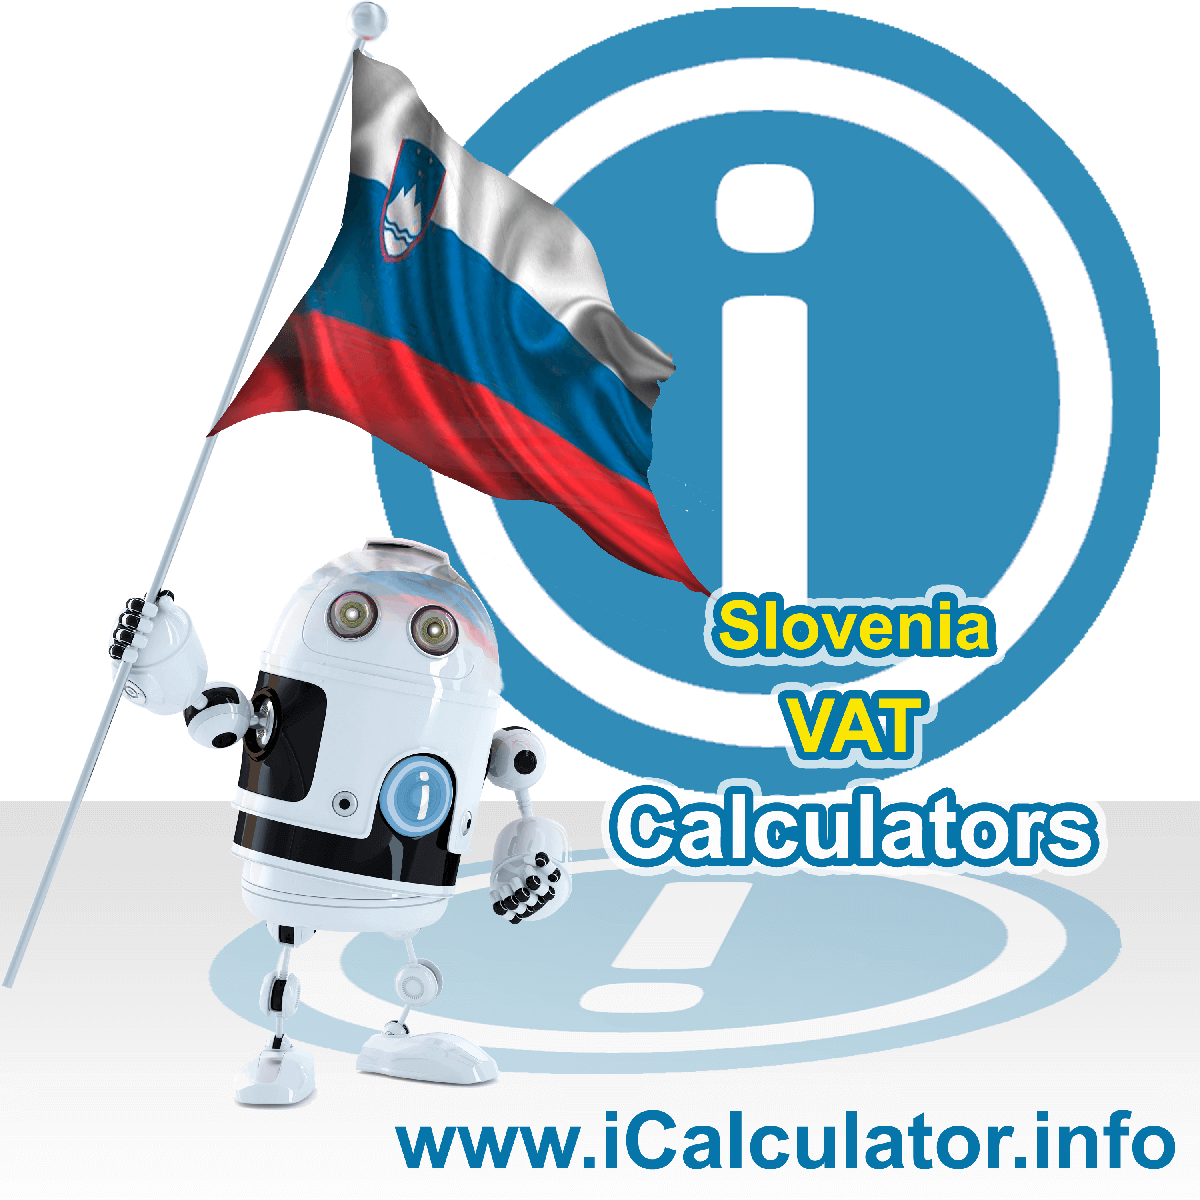 Slovenia VAT Calculator. This image shows the Slovenia flag and information relating to the VAT formula used for calculating Value Added Tax in Slovenia using the Slovenia VAT Calculator in 2023